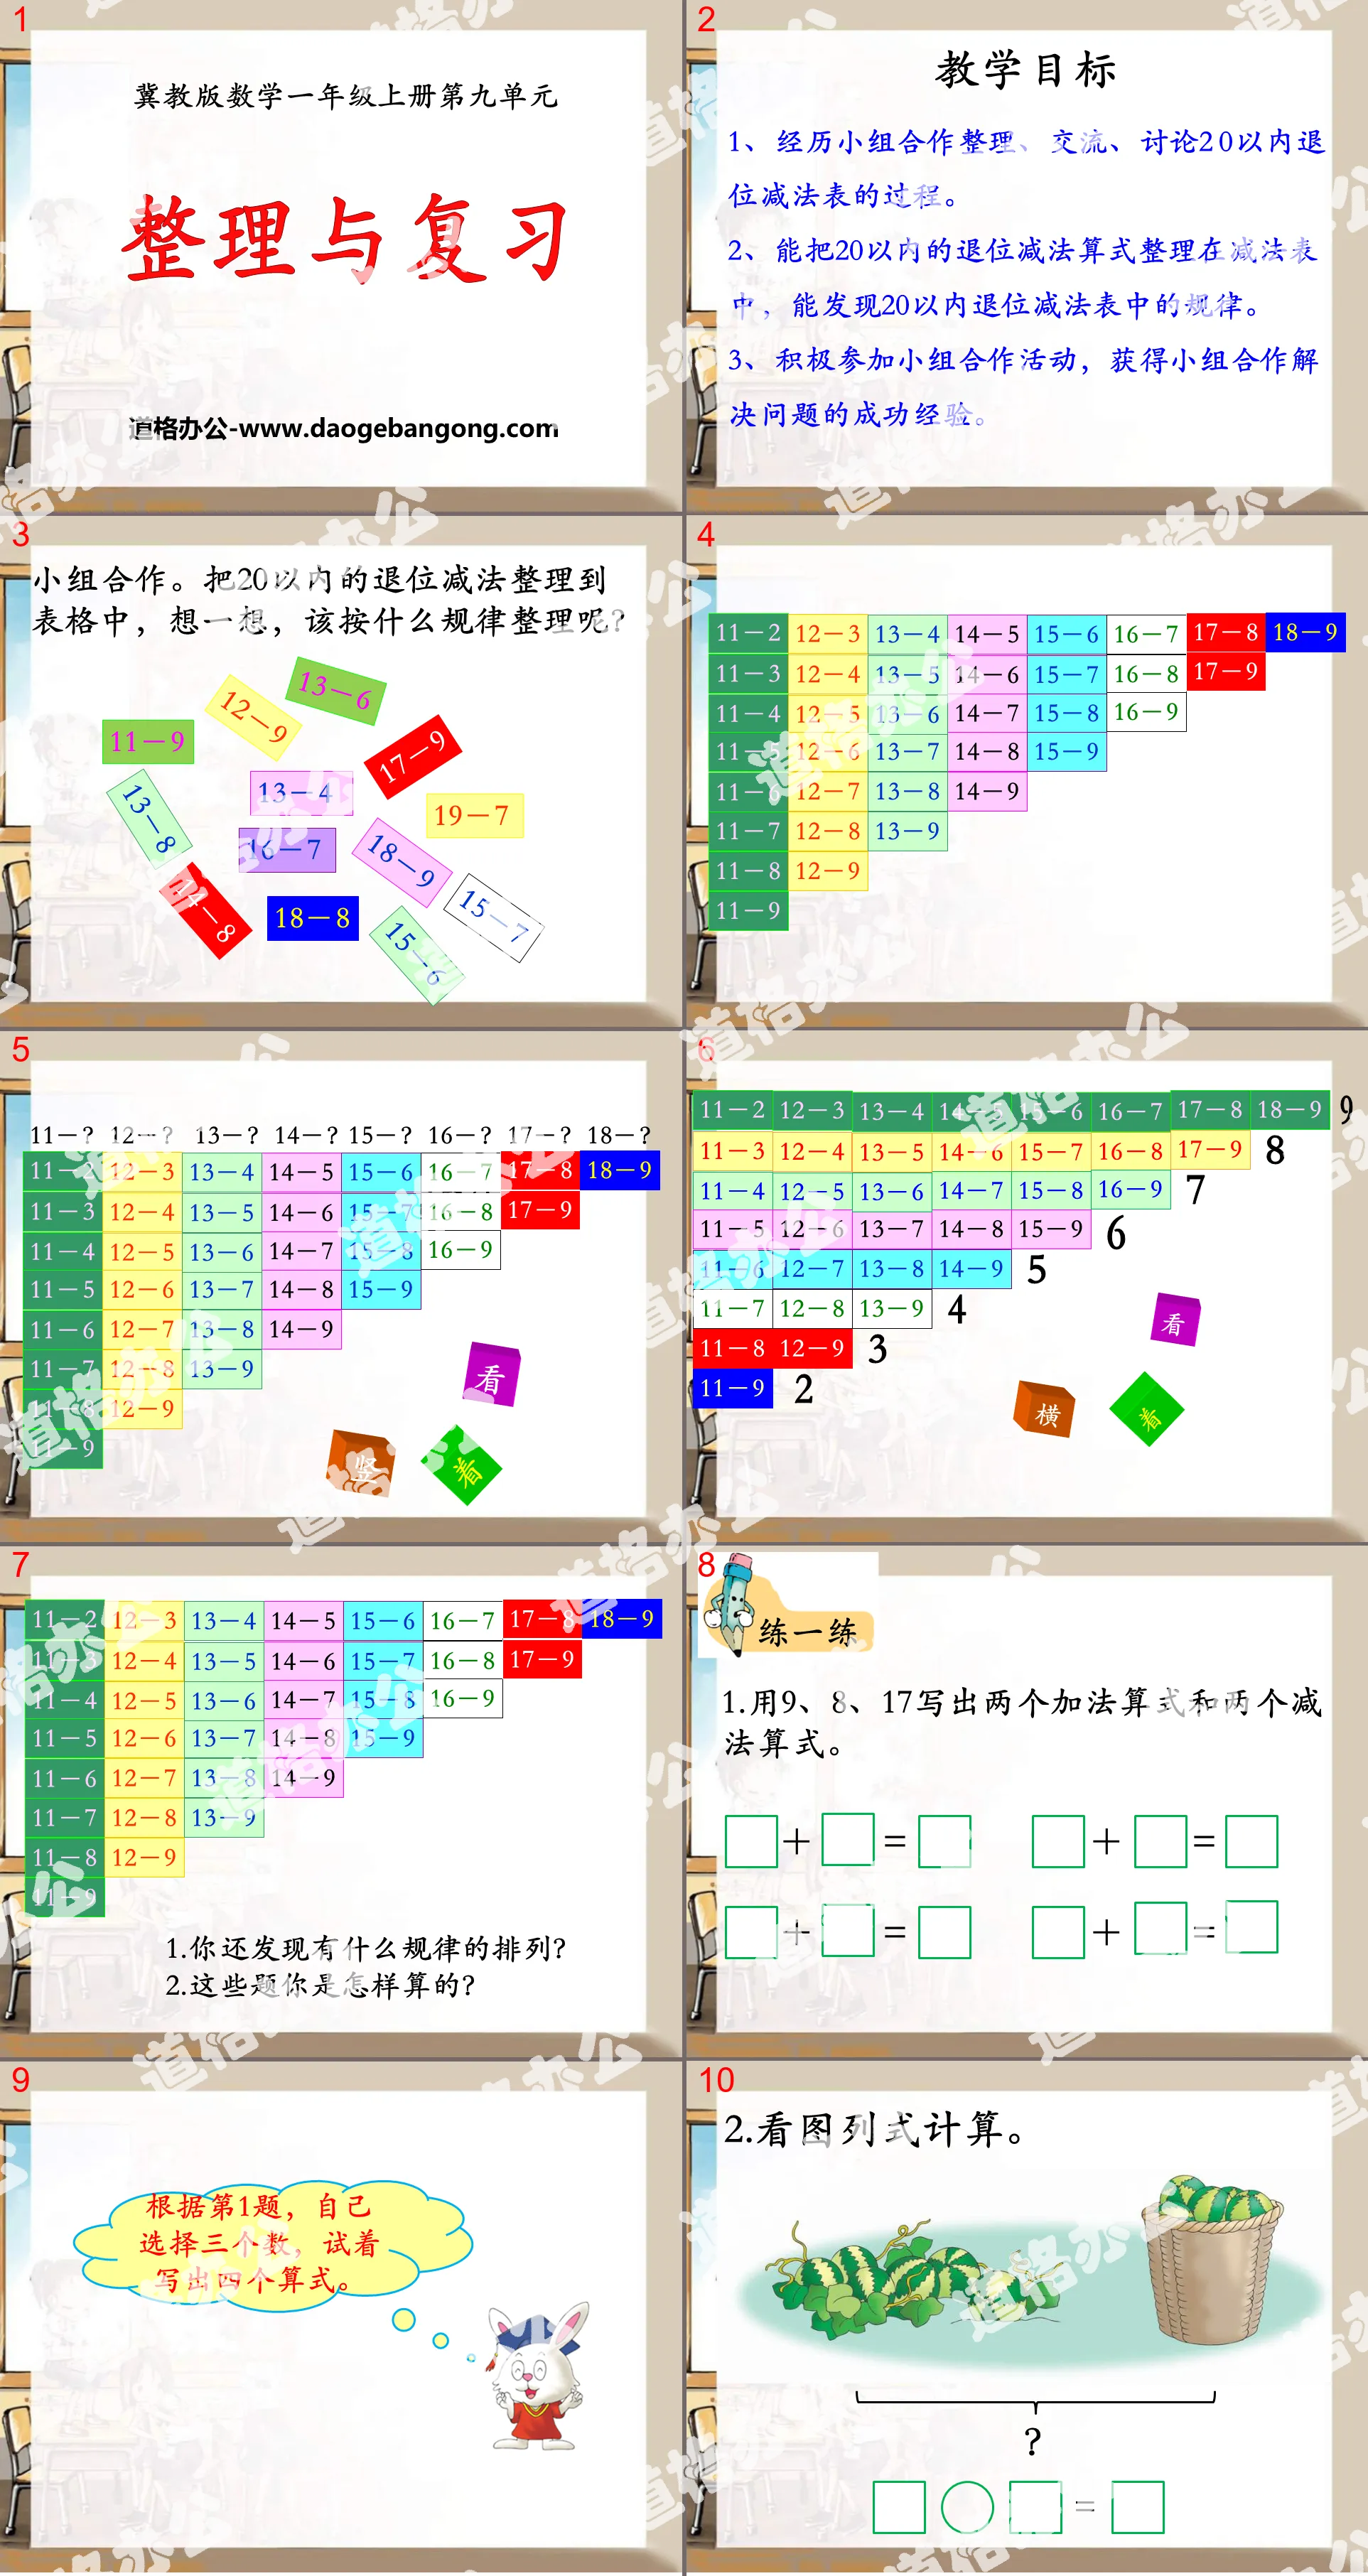 "Organization and Review" PPT courseware for subtraction within 20